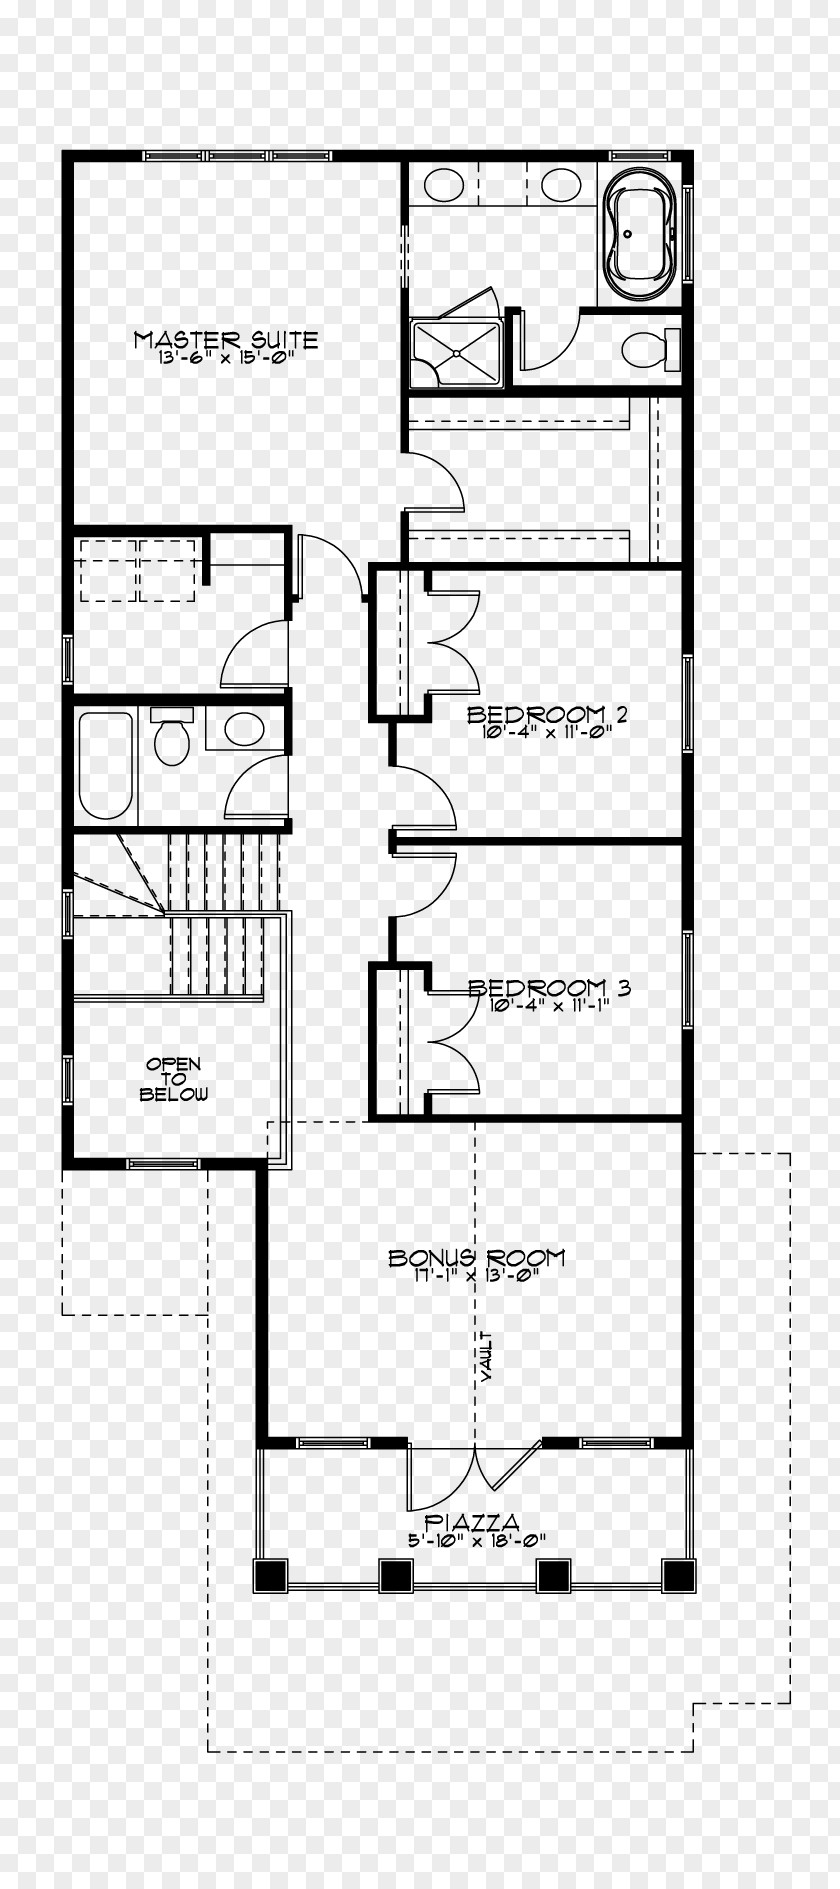 A Roommate On The Upper Floor Plan Furniture Technical Drawing PNG